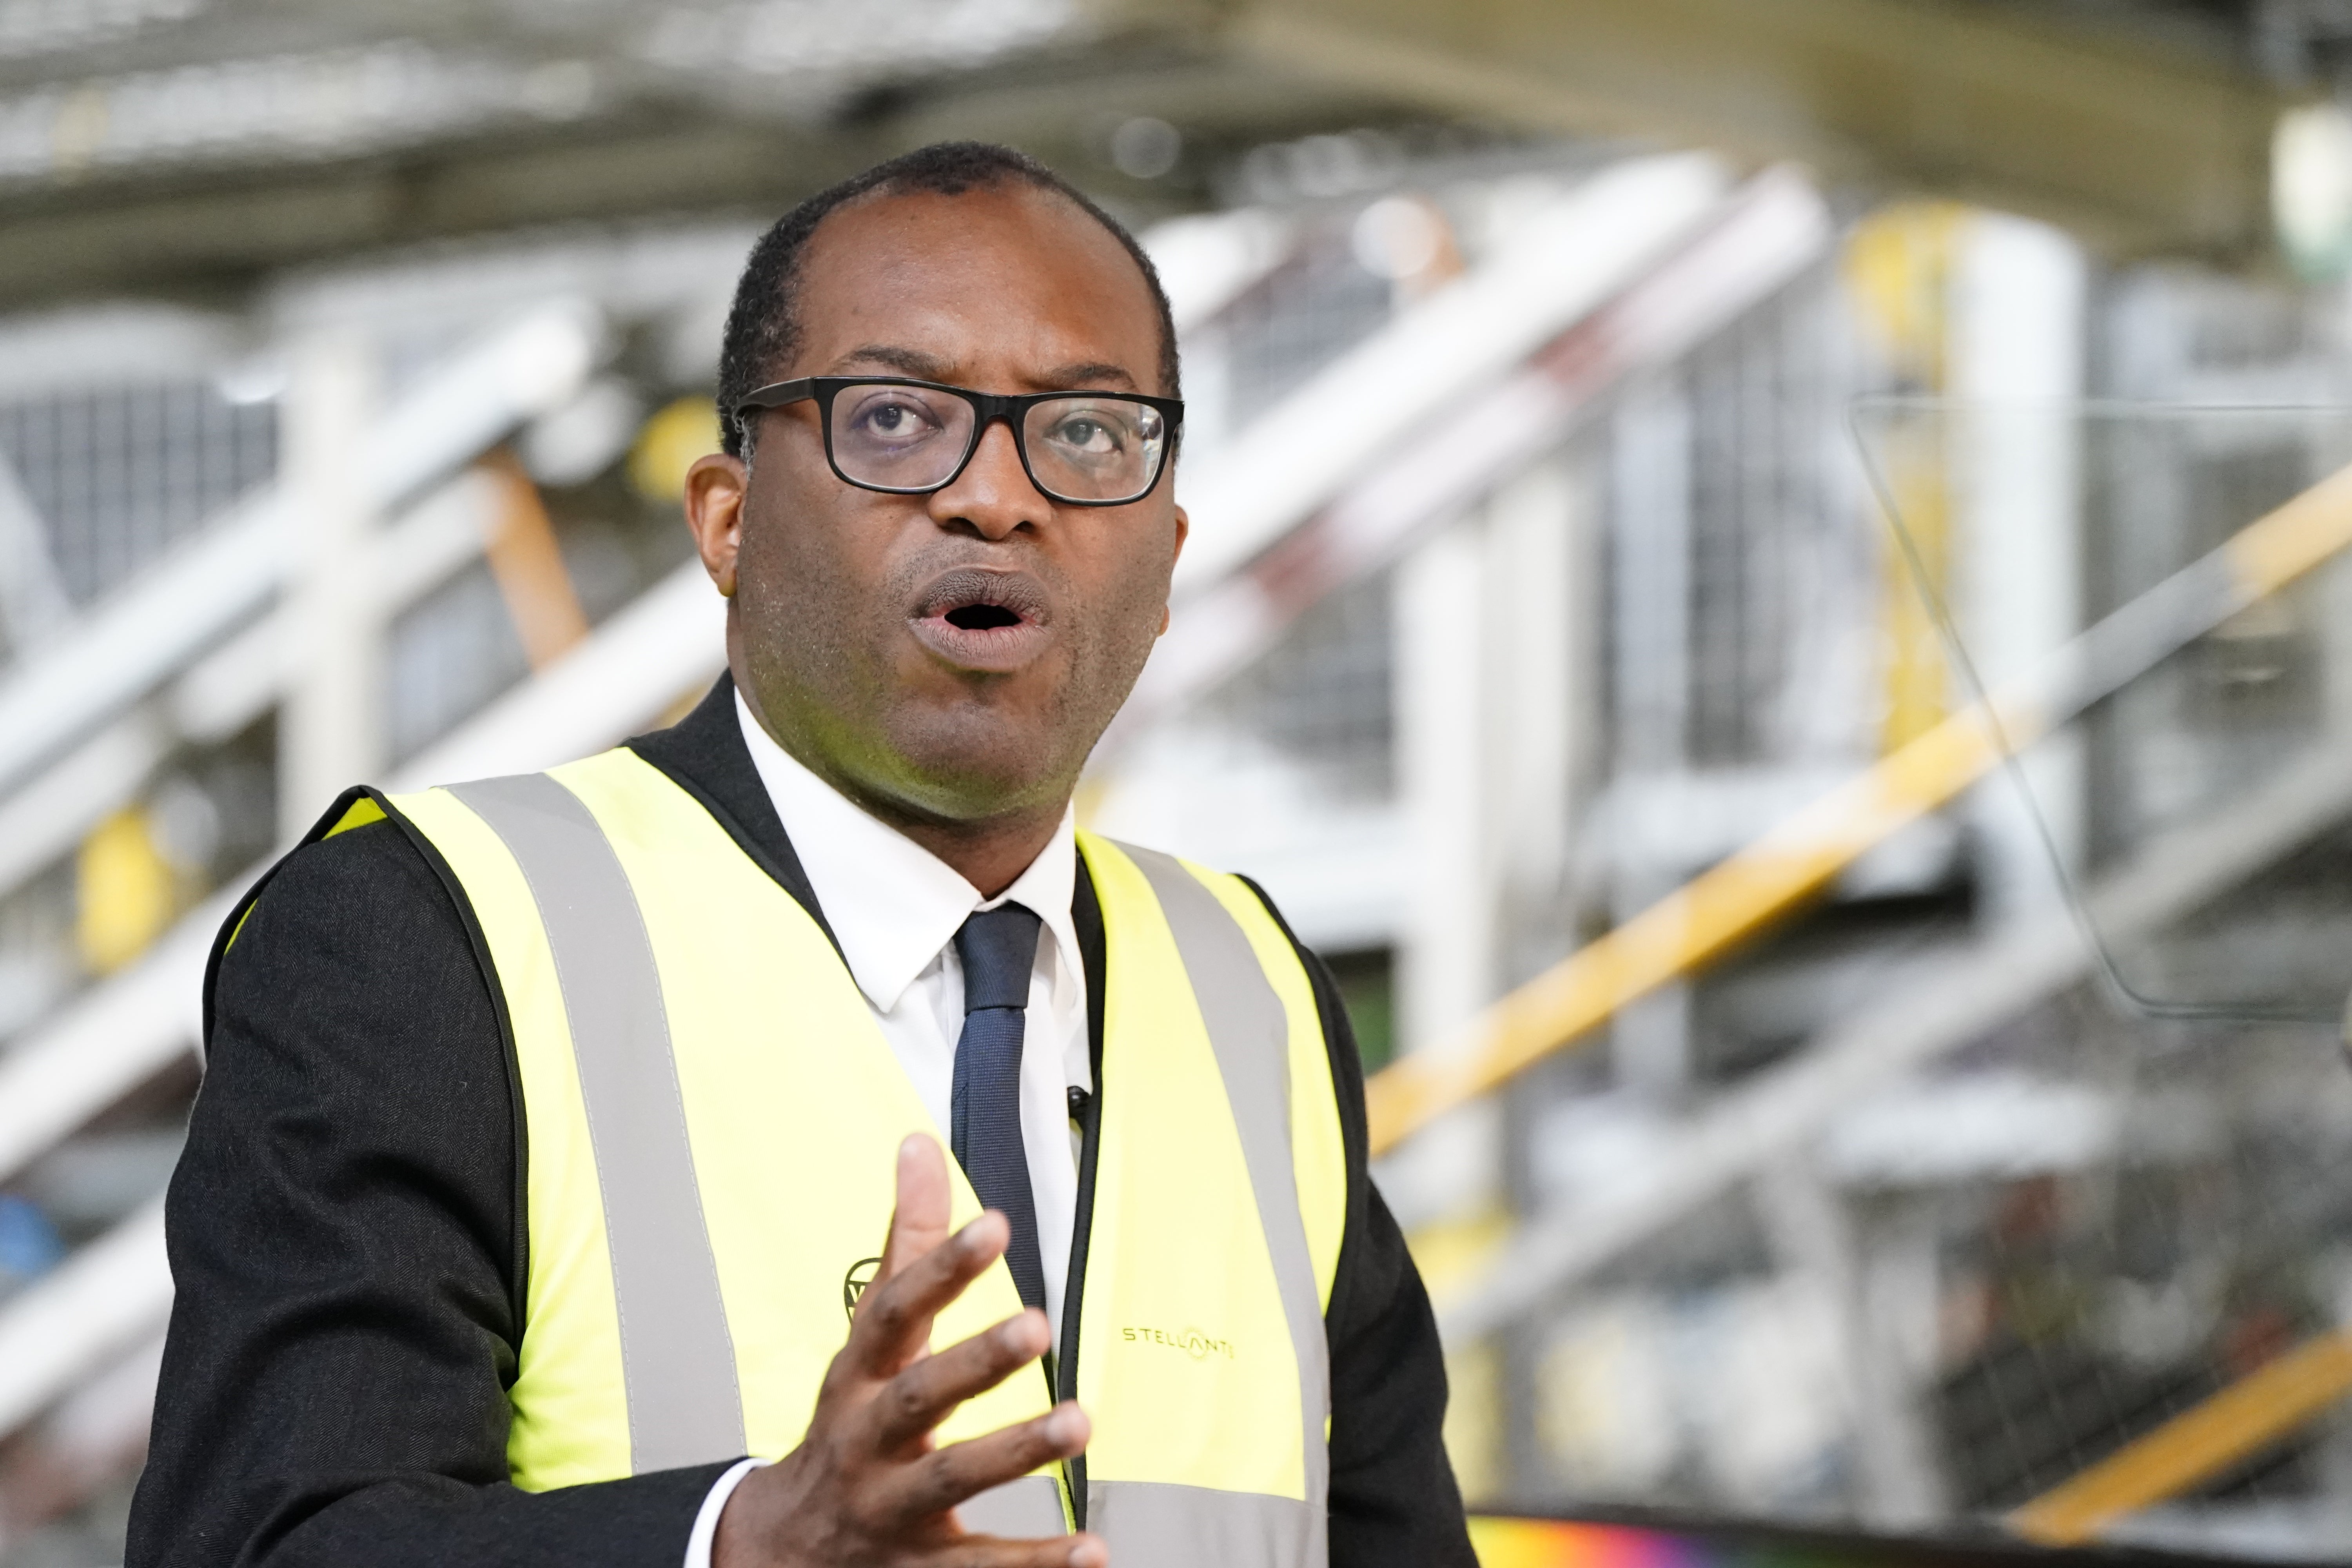 Business secretary Kwasi Kwarteng held urgent talks with the energy industry on Saturday